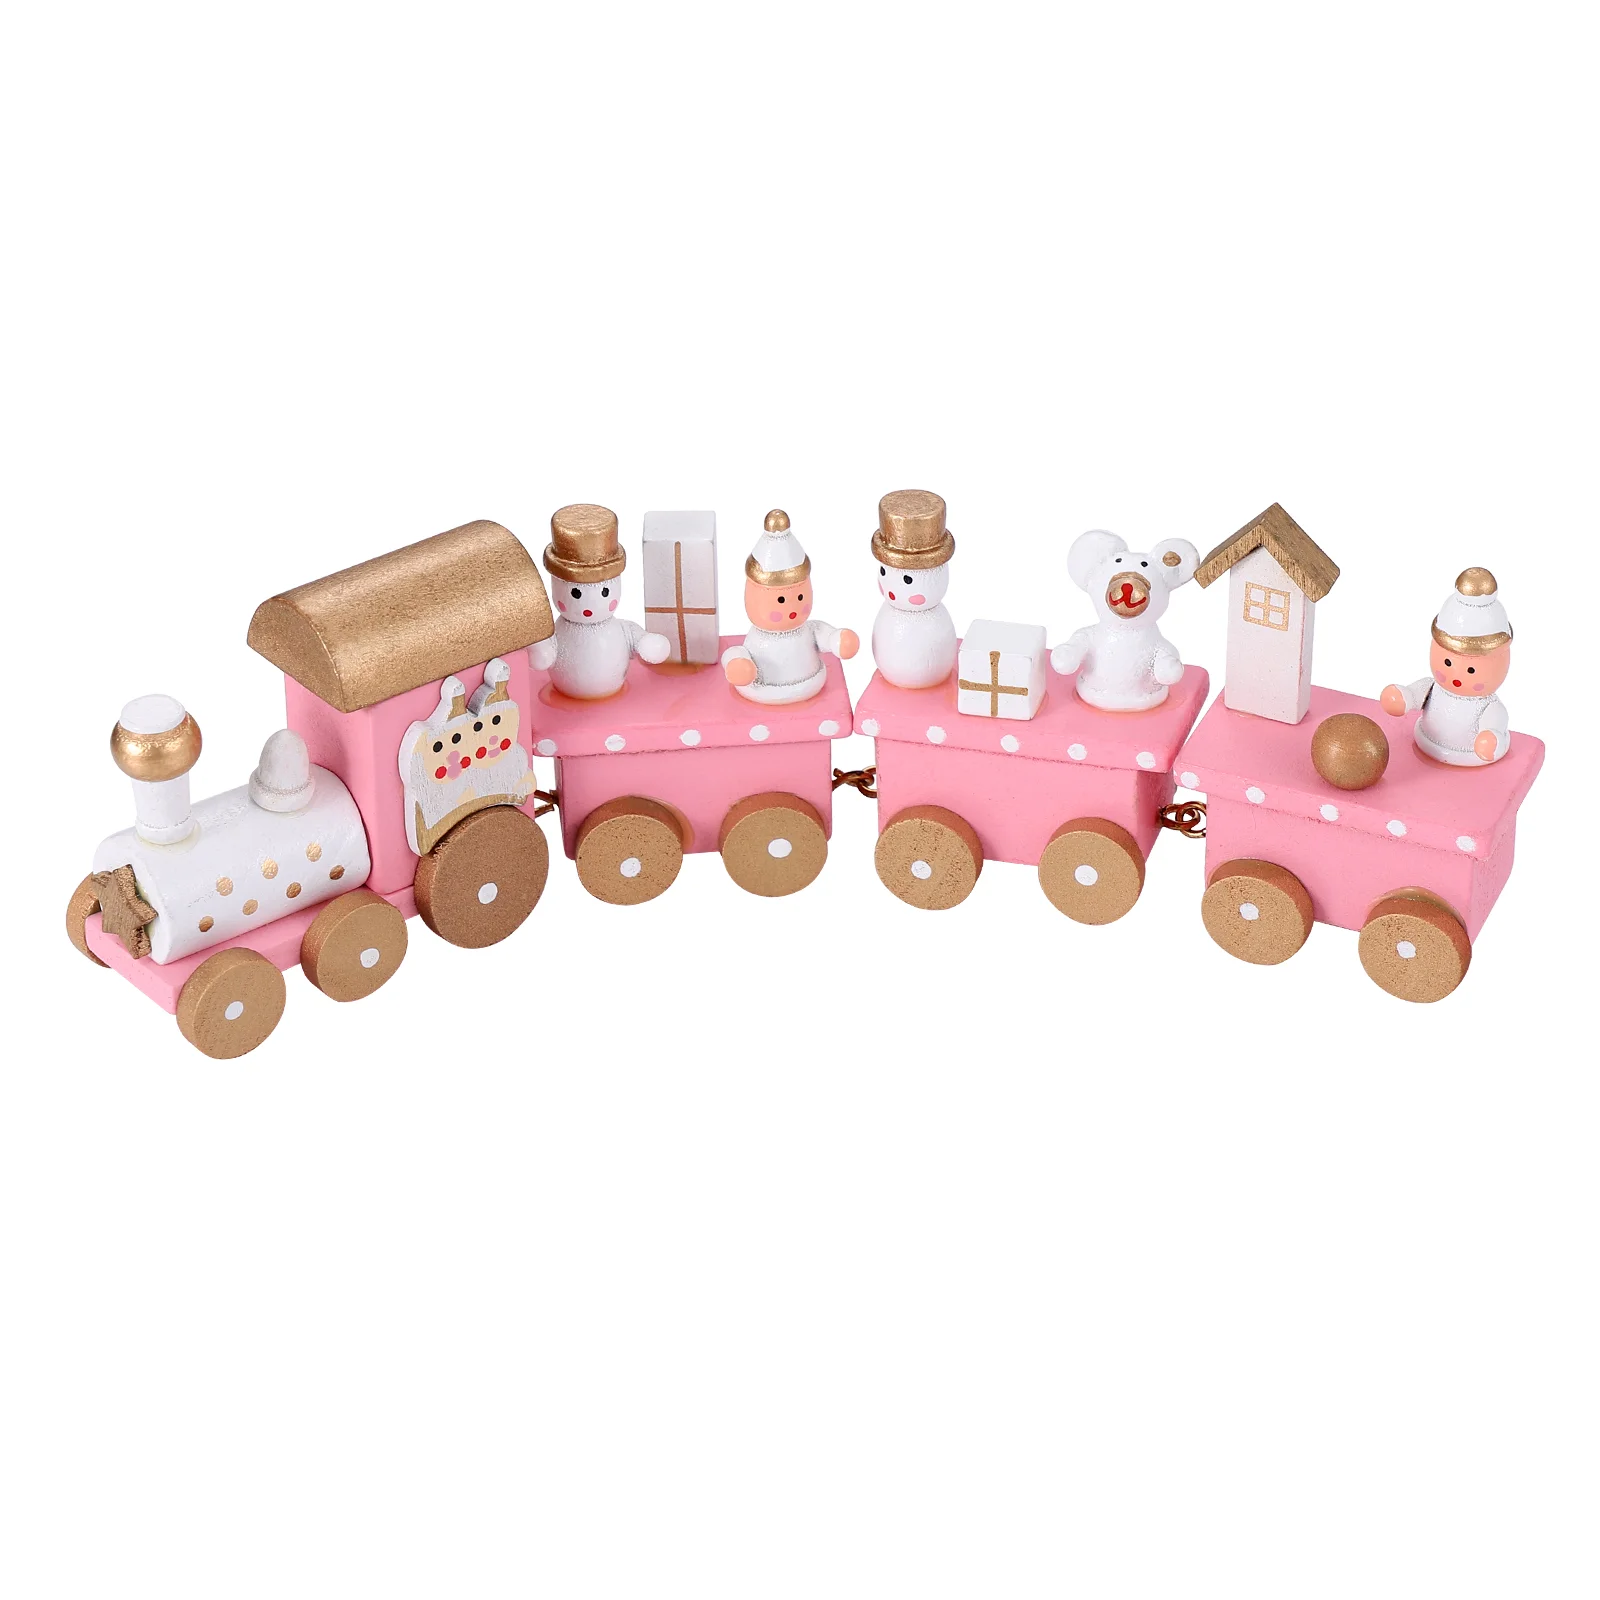 

NUOBESTY Wooden Christmas Train Mini 4 Section Christmas Train Set for Kids Teen